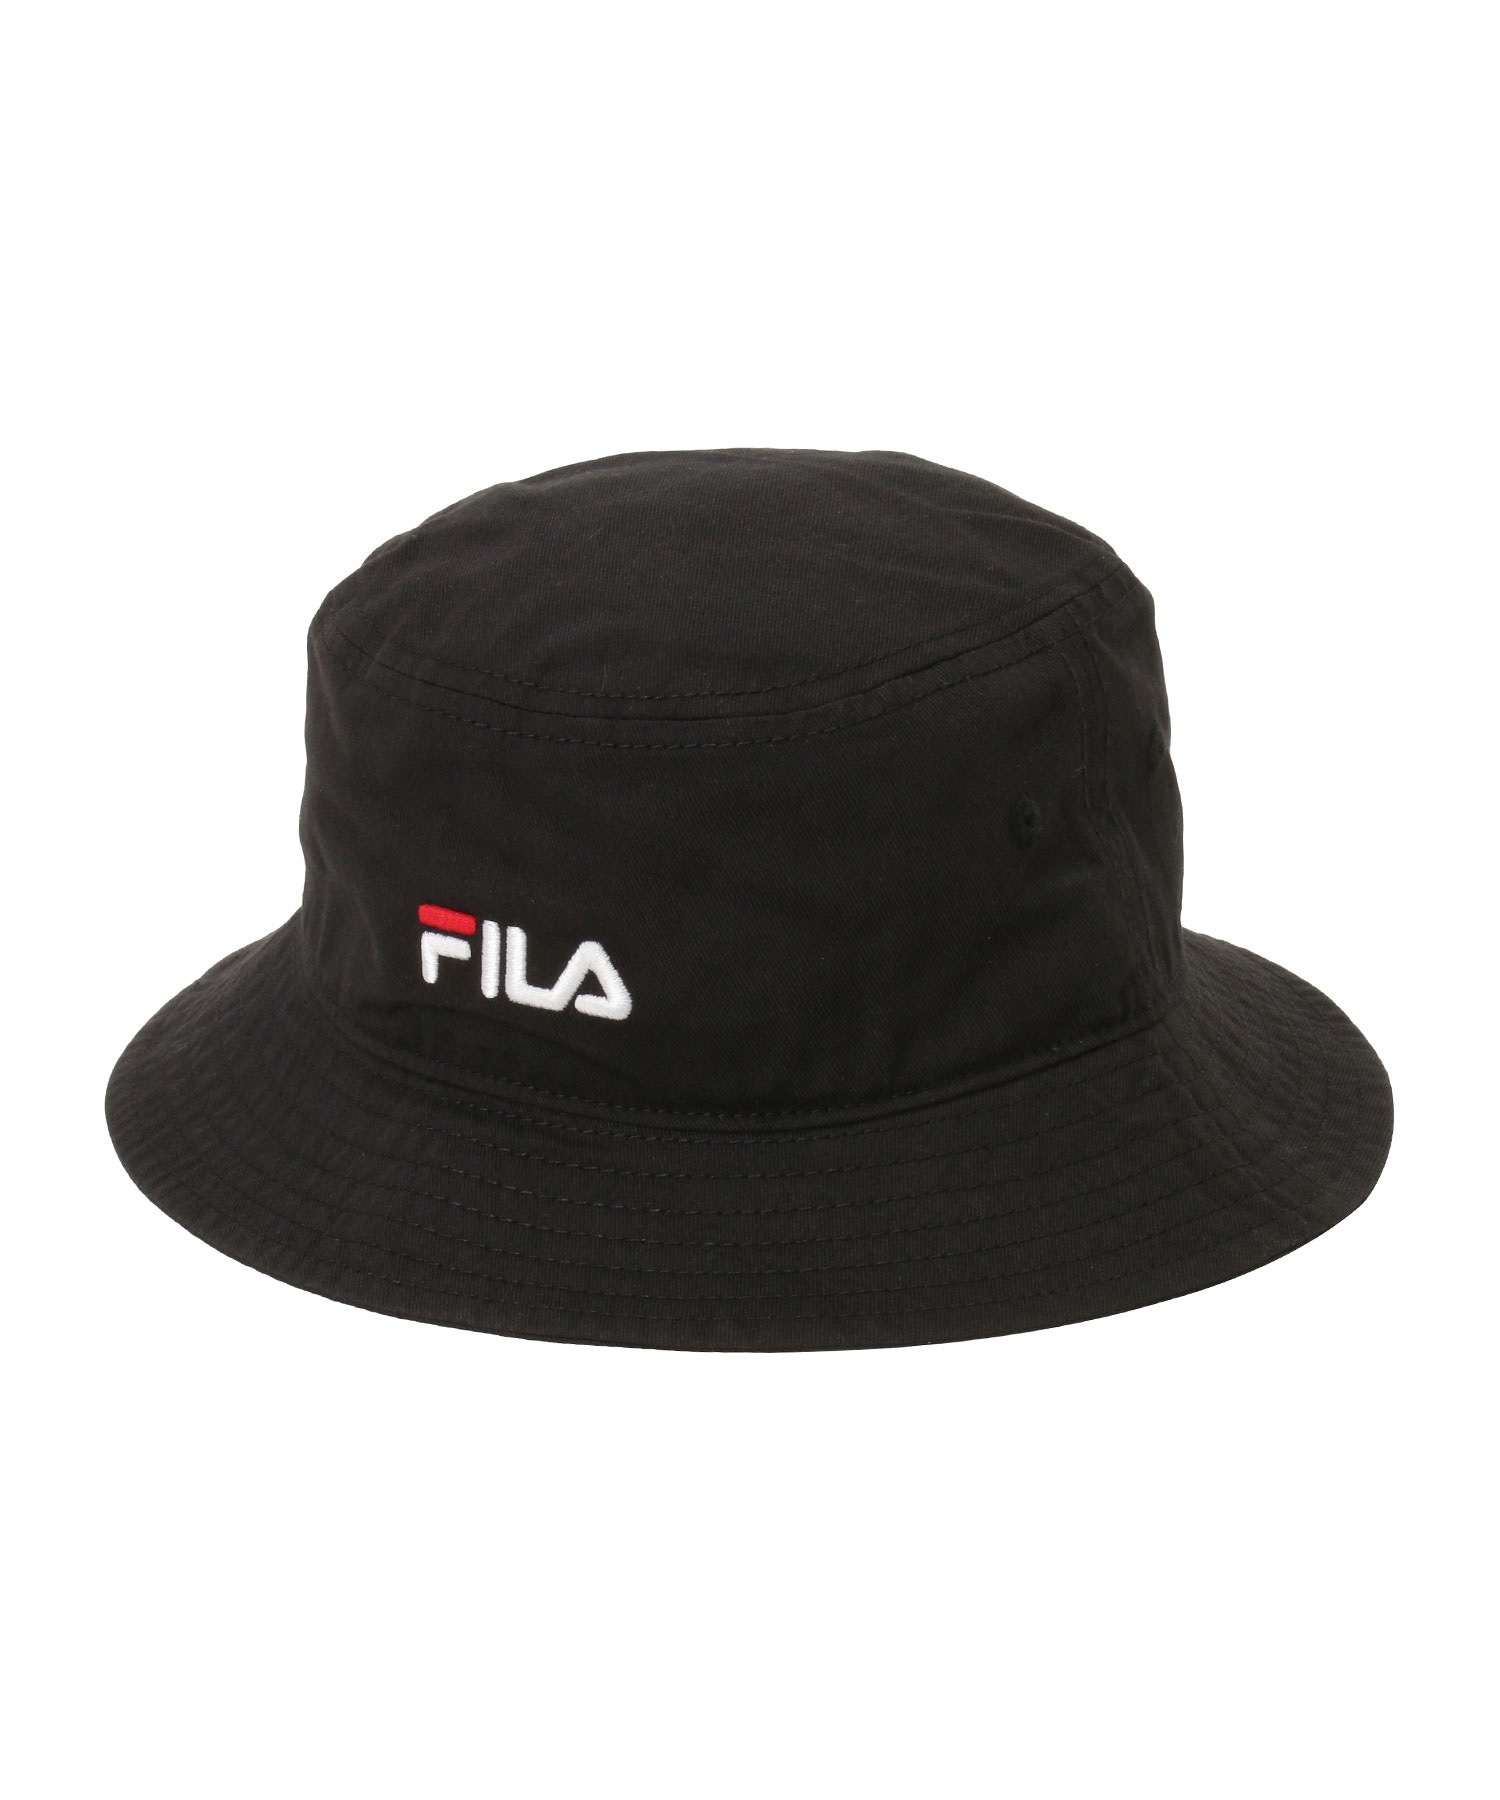 FILA/フィラ キッズ ハット 117113702(BE-56)